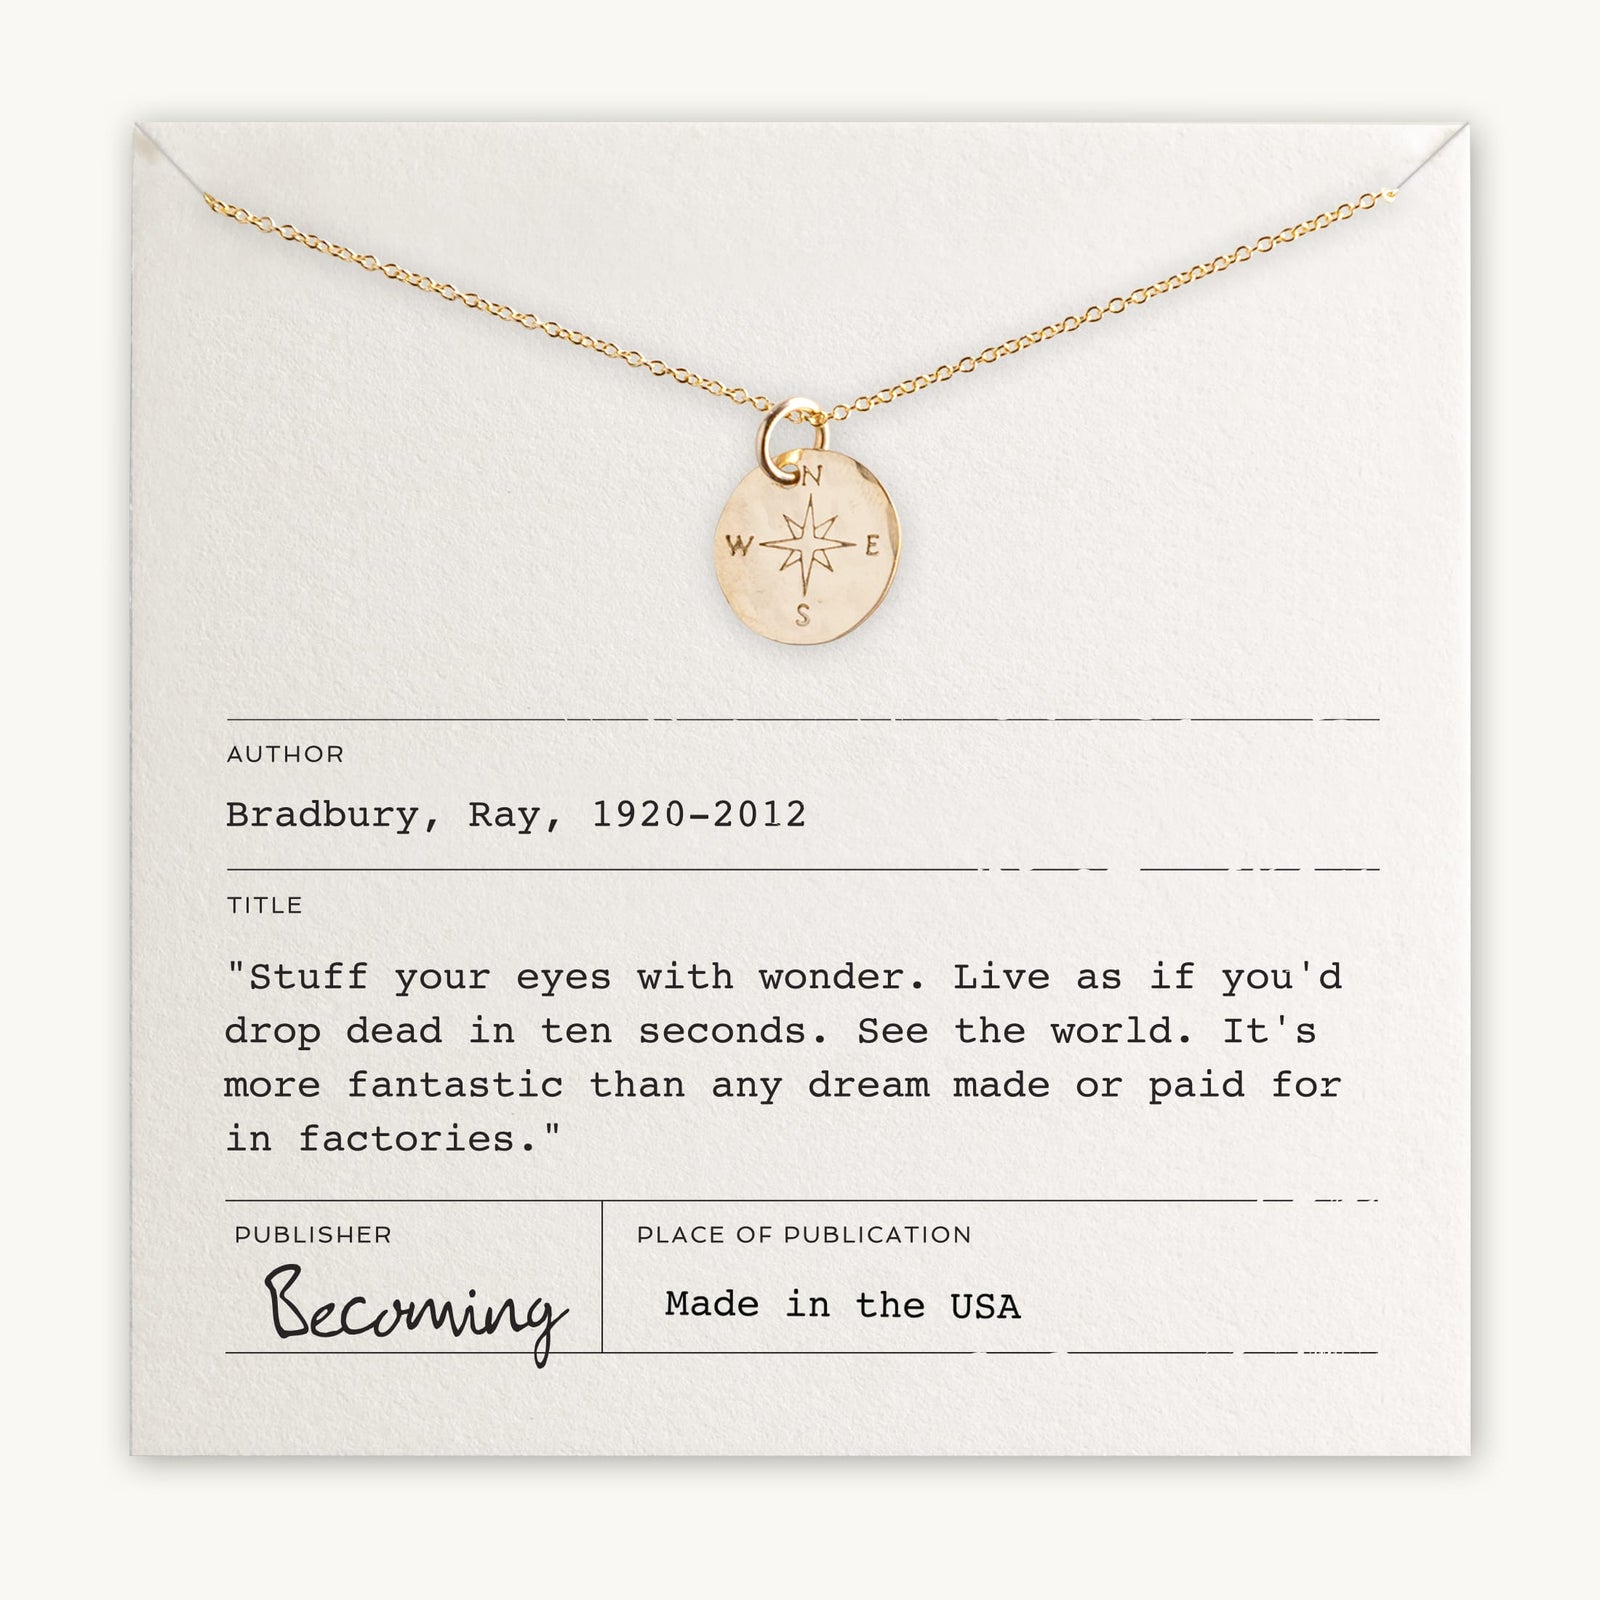 Gold filled Compass Necklace from Becoming Jewelry on a card with a Ray Bradbury quote.